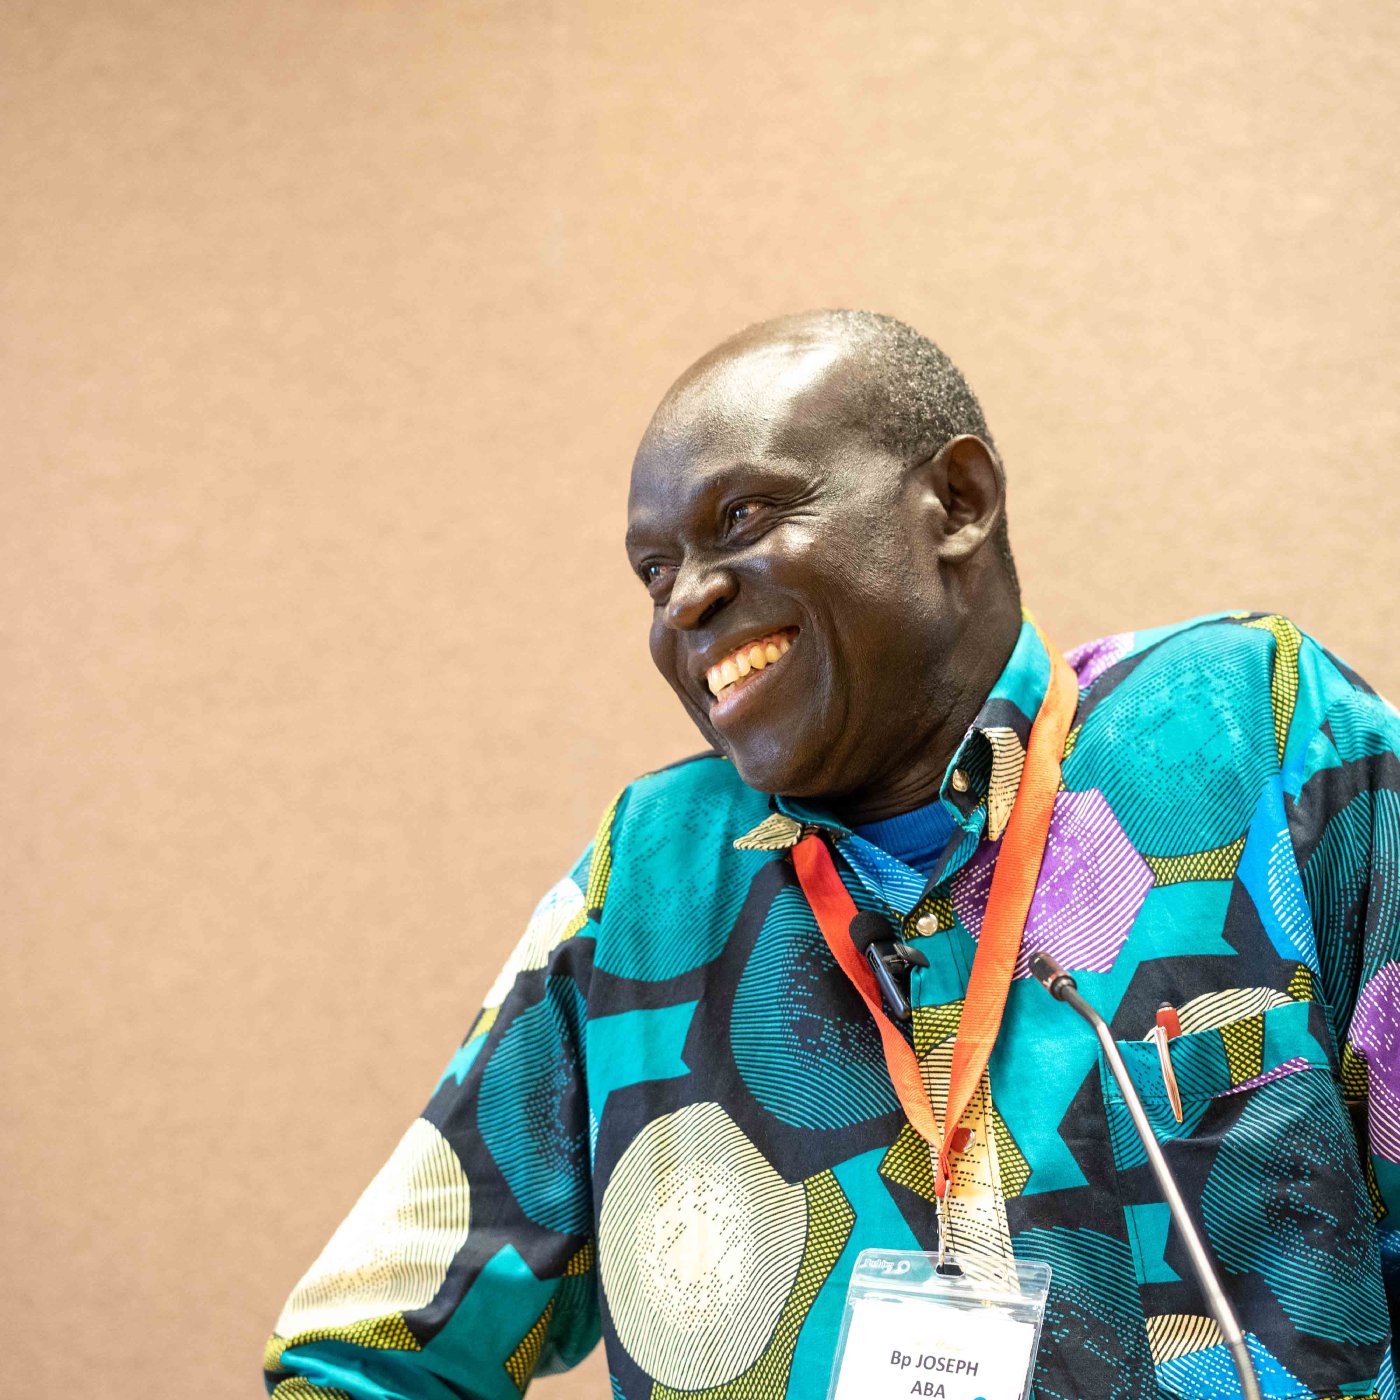 Fireside Session 11 - A Testimony from South Sudan - Bishop Joseph Aba